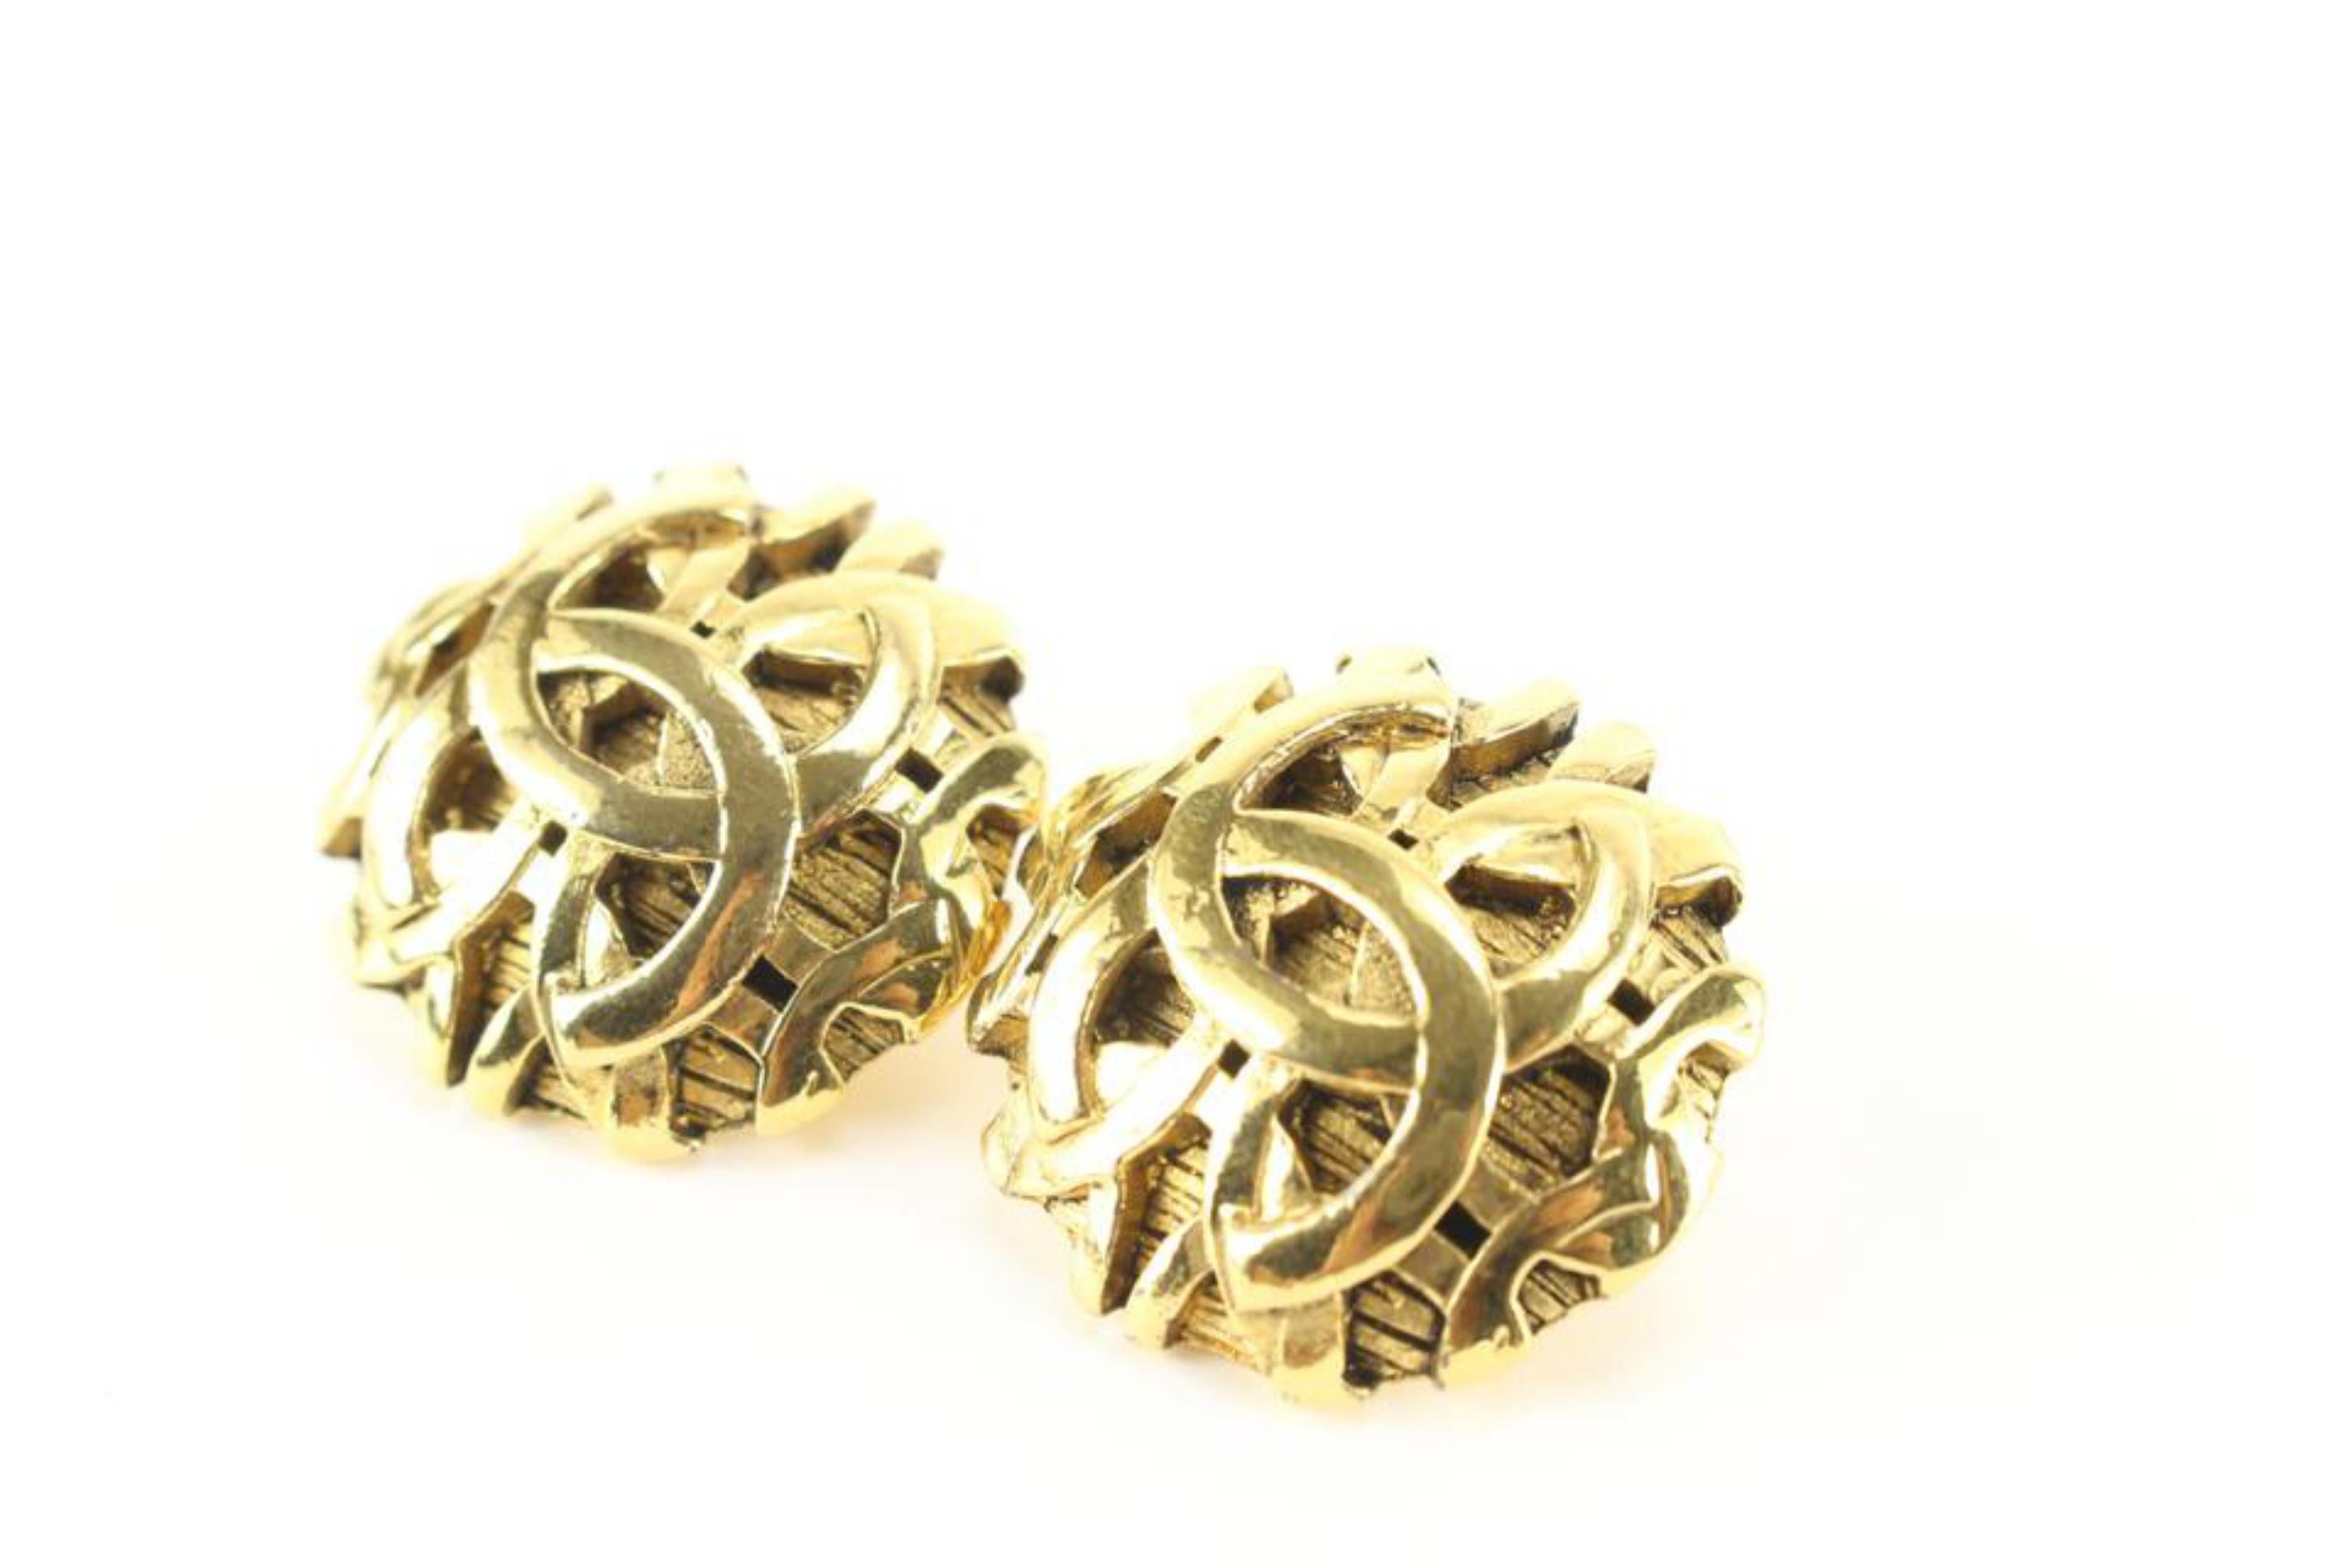 Vintage CHANEL Gold Tone Round Earrings With Faux Pearl and 